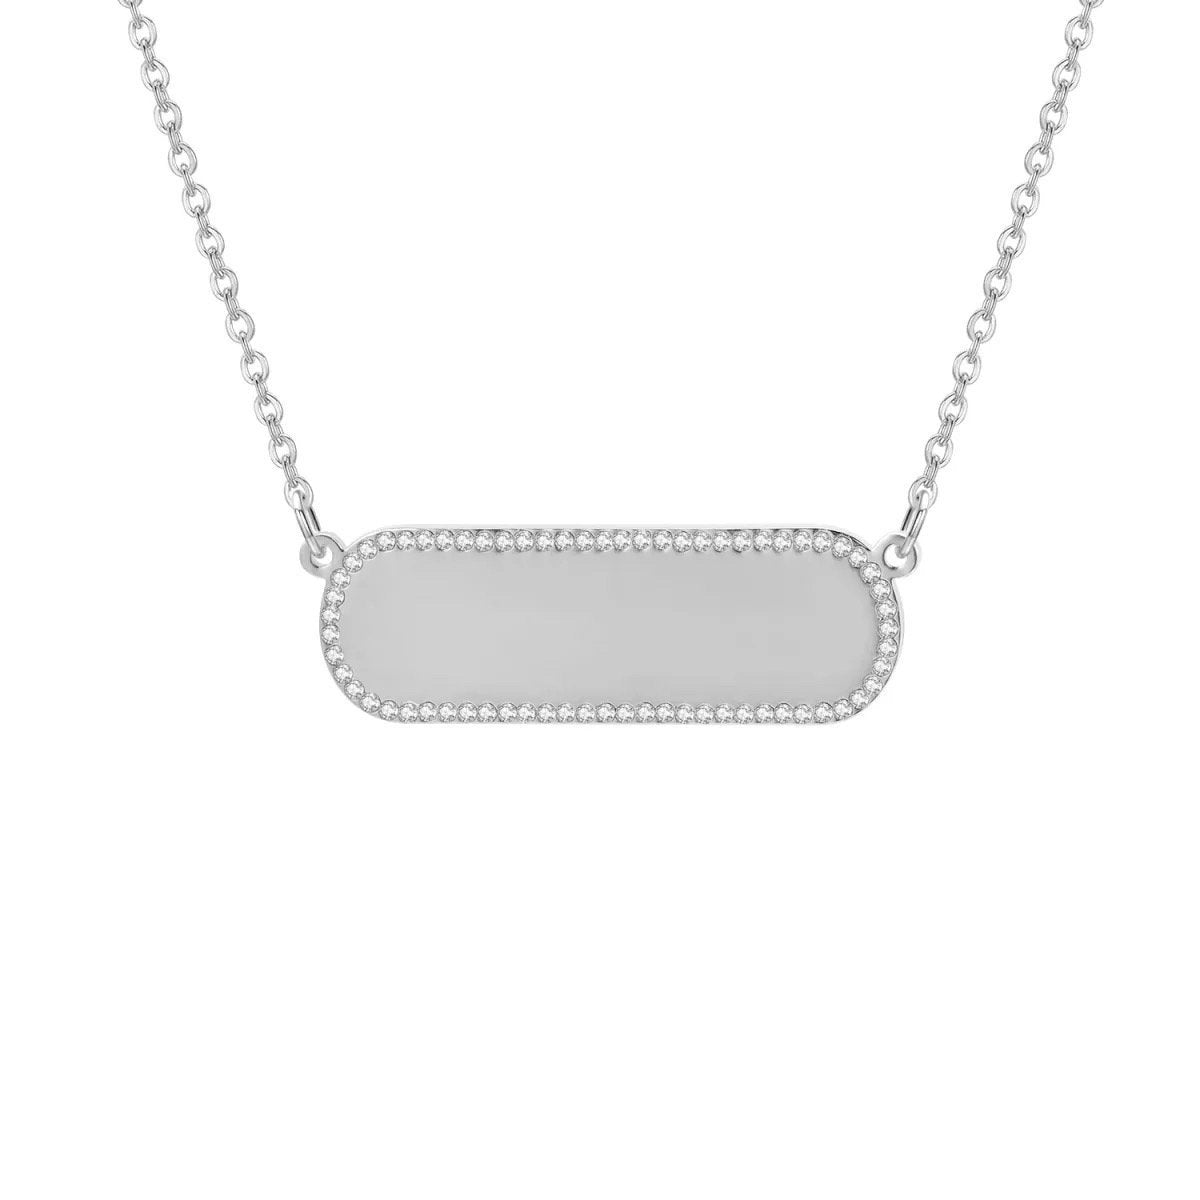 Mogul - Iced Out Custom Engraved Round Bar Necklace - HouseofLx18K White Gold